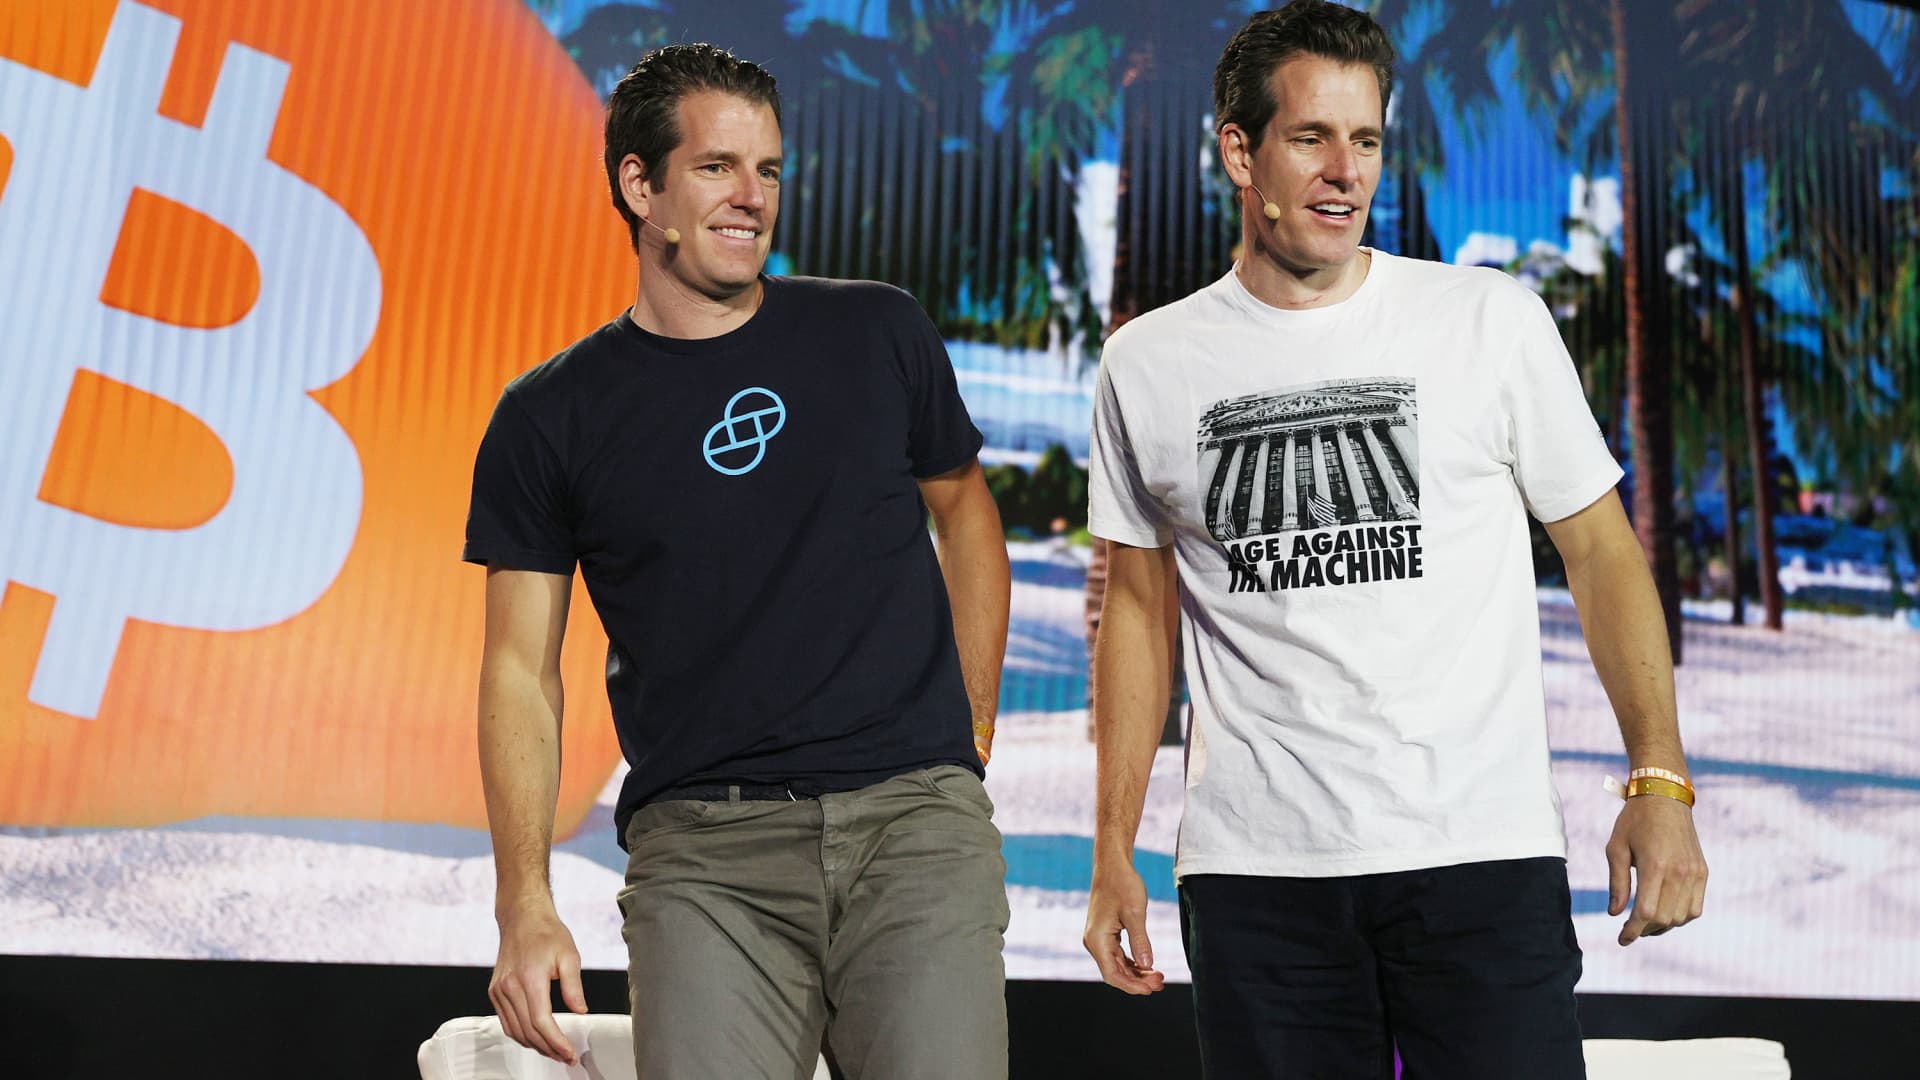 Winklevoss twins Twins, who cut 10%, say that the “crypto winter” is here